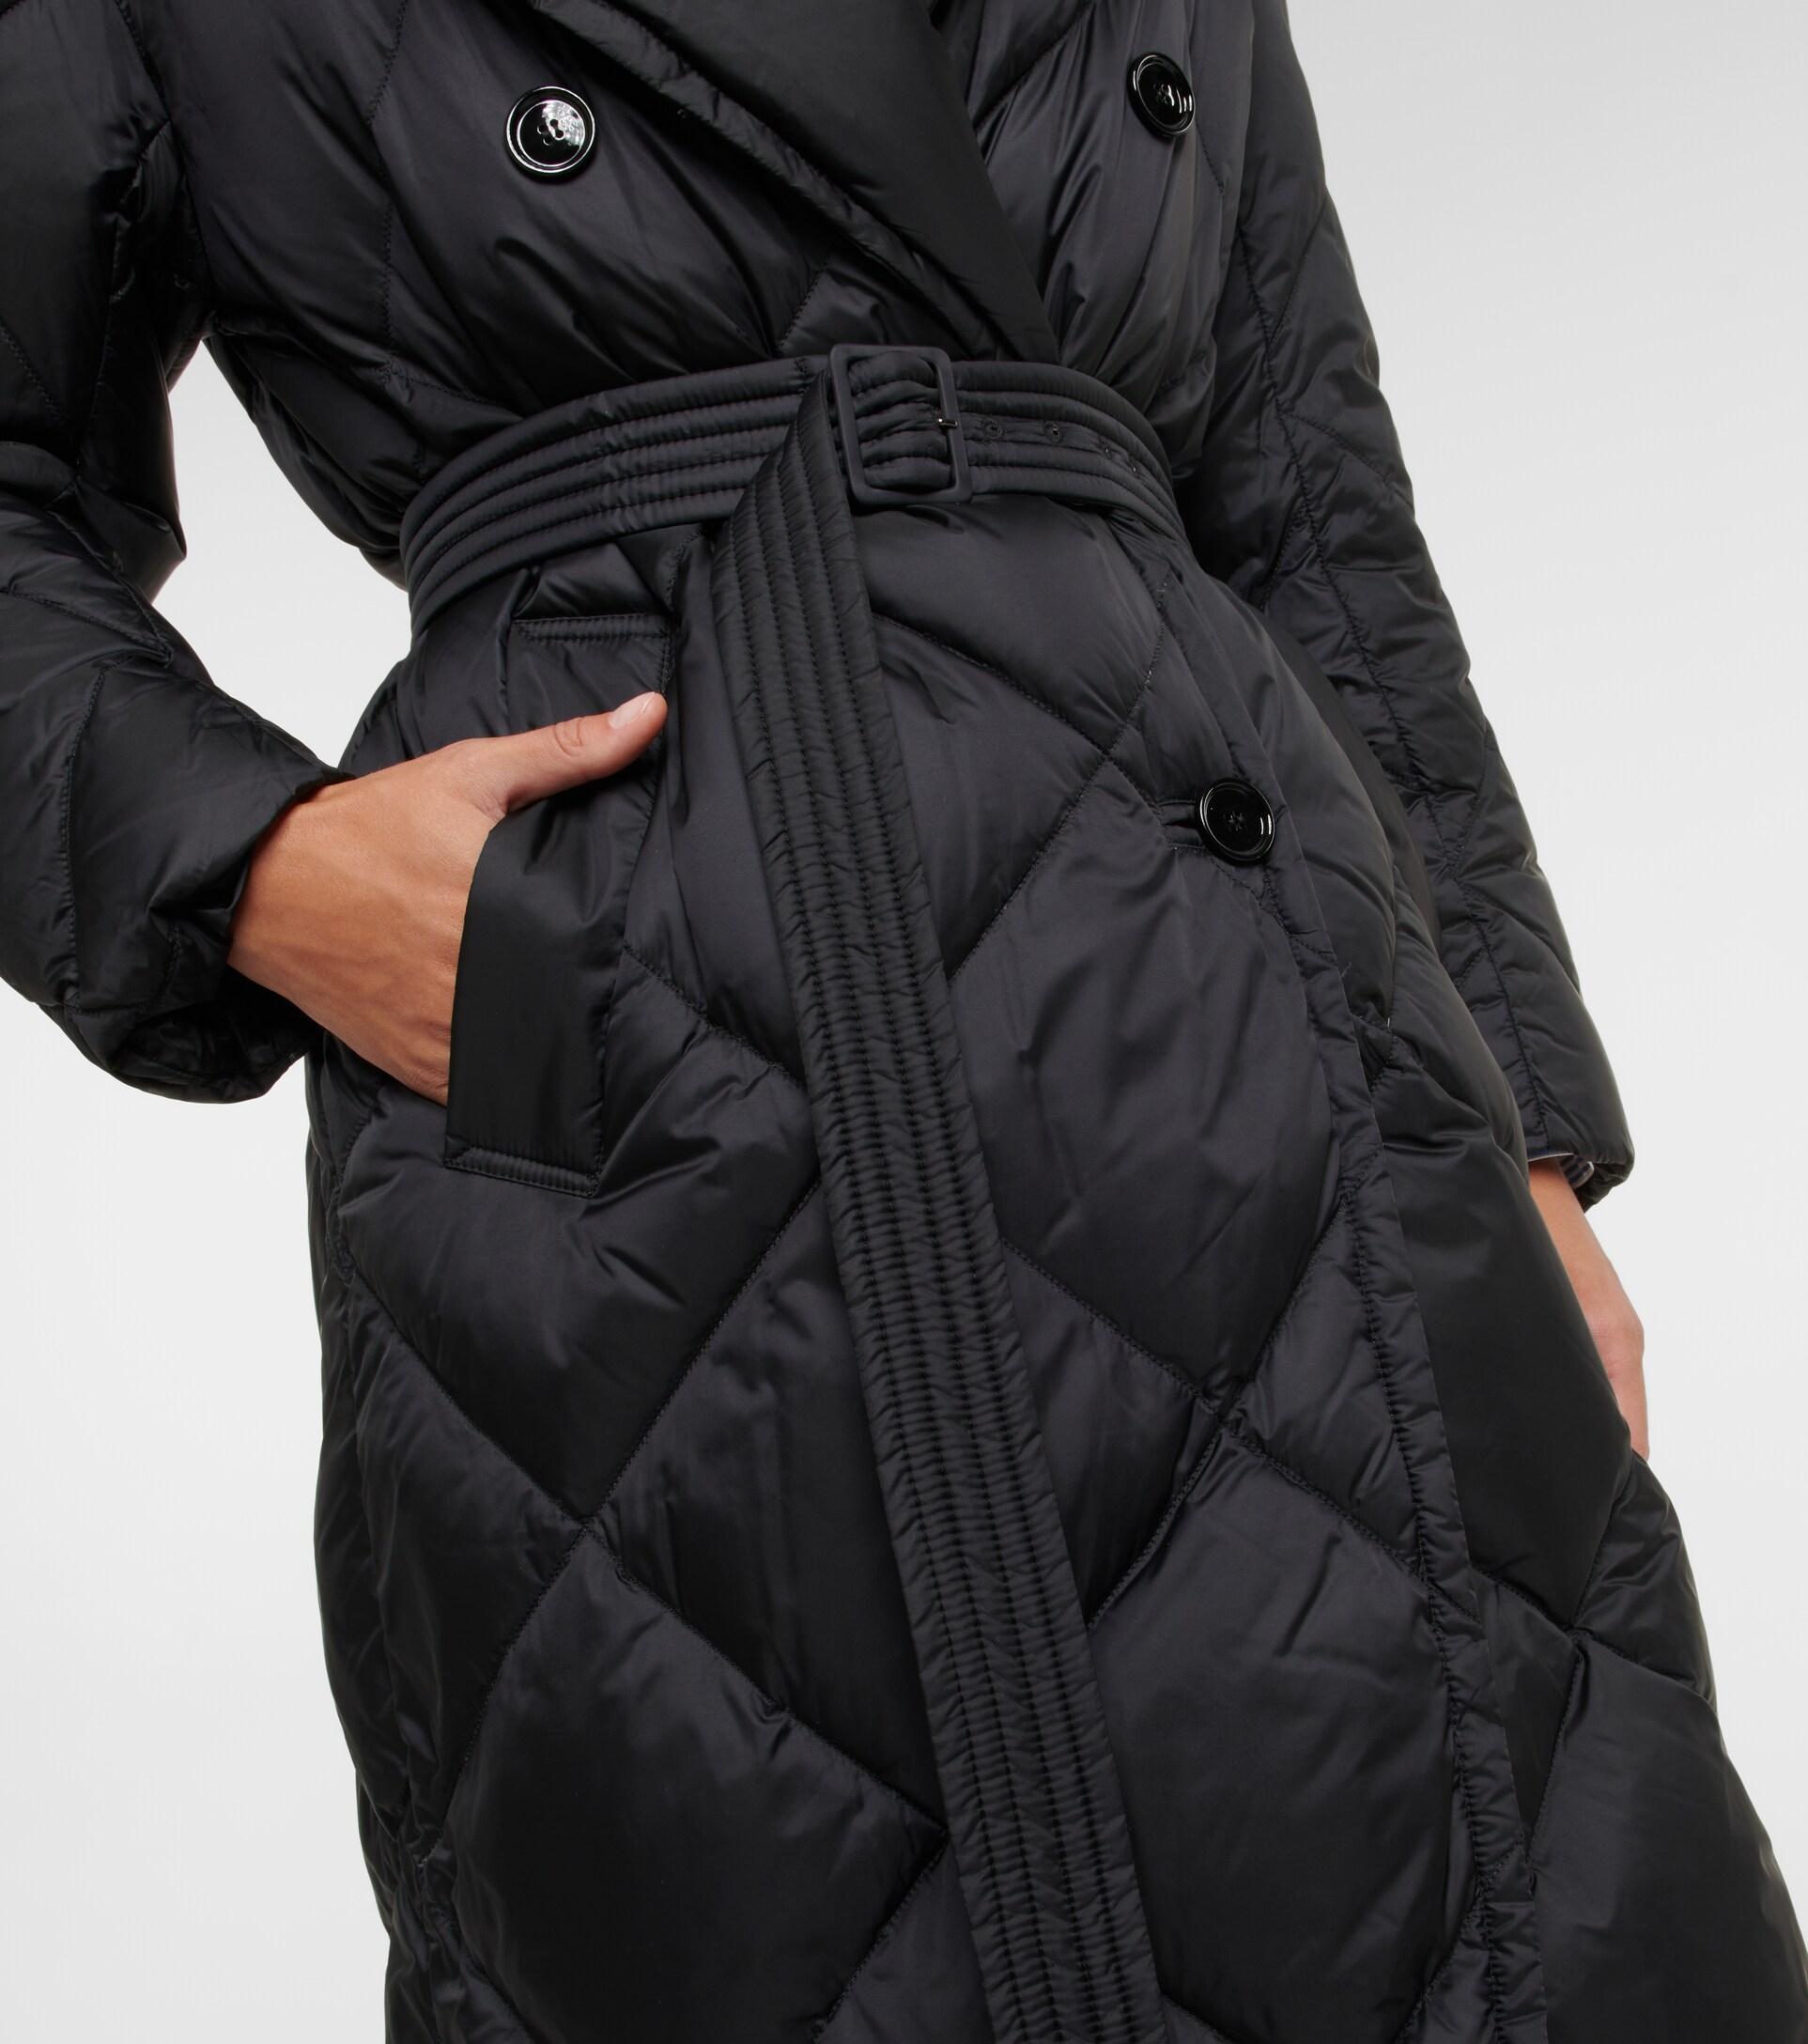 Max Mara The Cube Double-breasted Down Coat in Black | Lyst